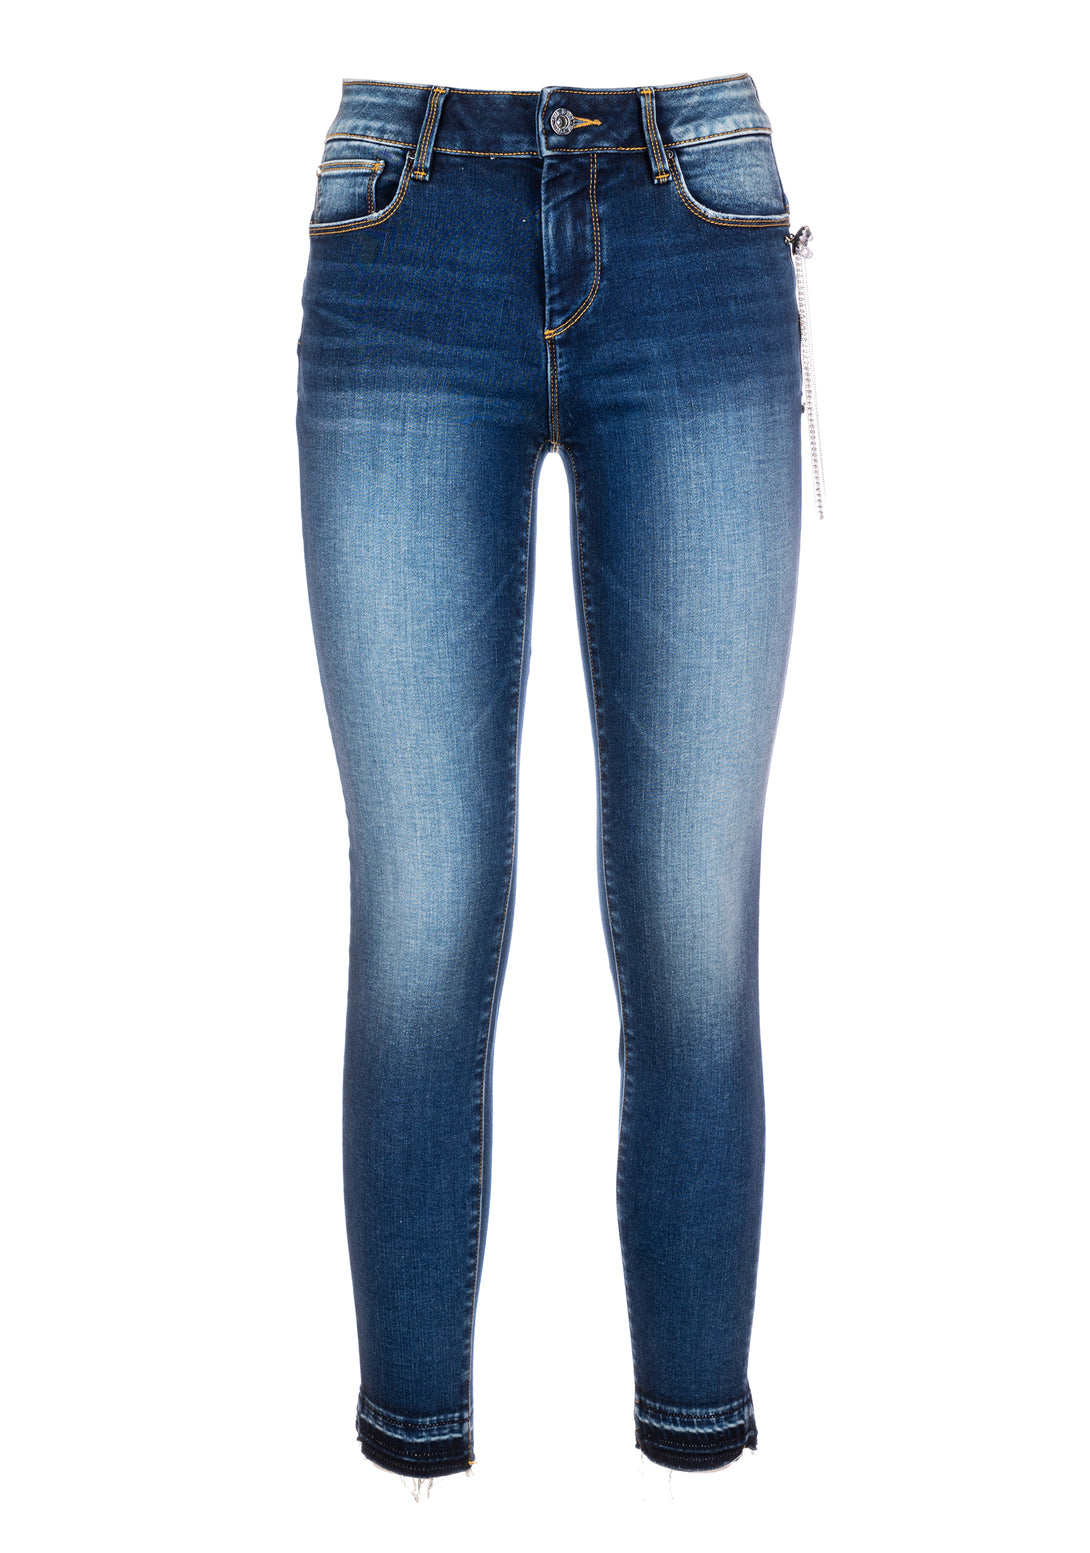 Jeans slim fit with push up effect made in denim with strong wash